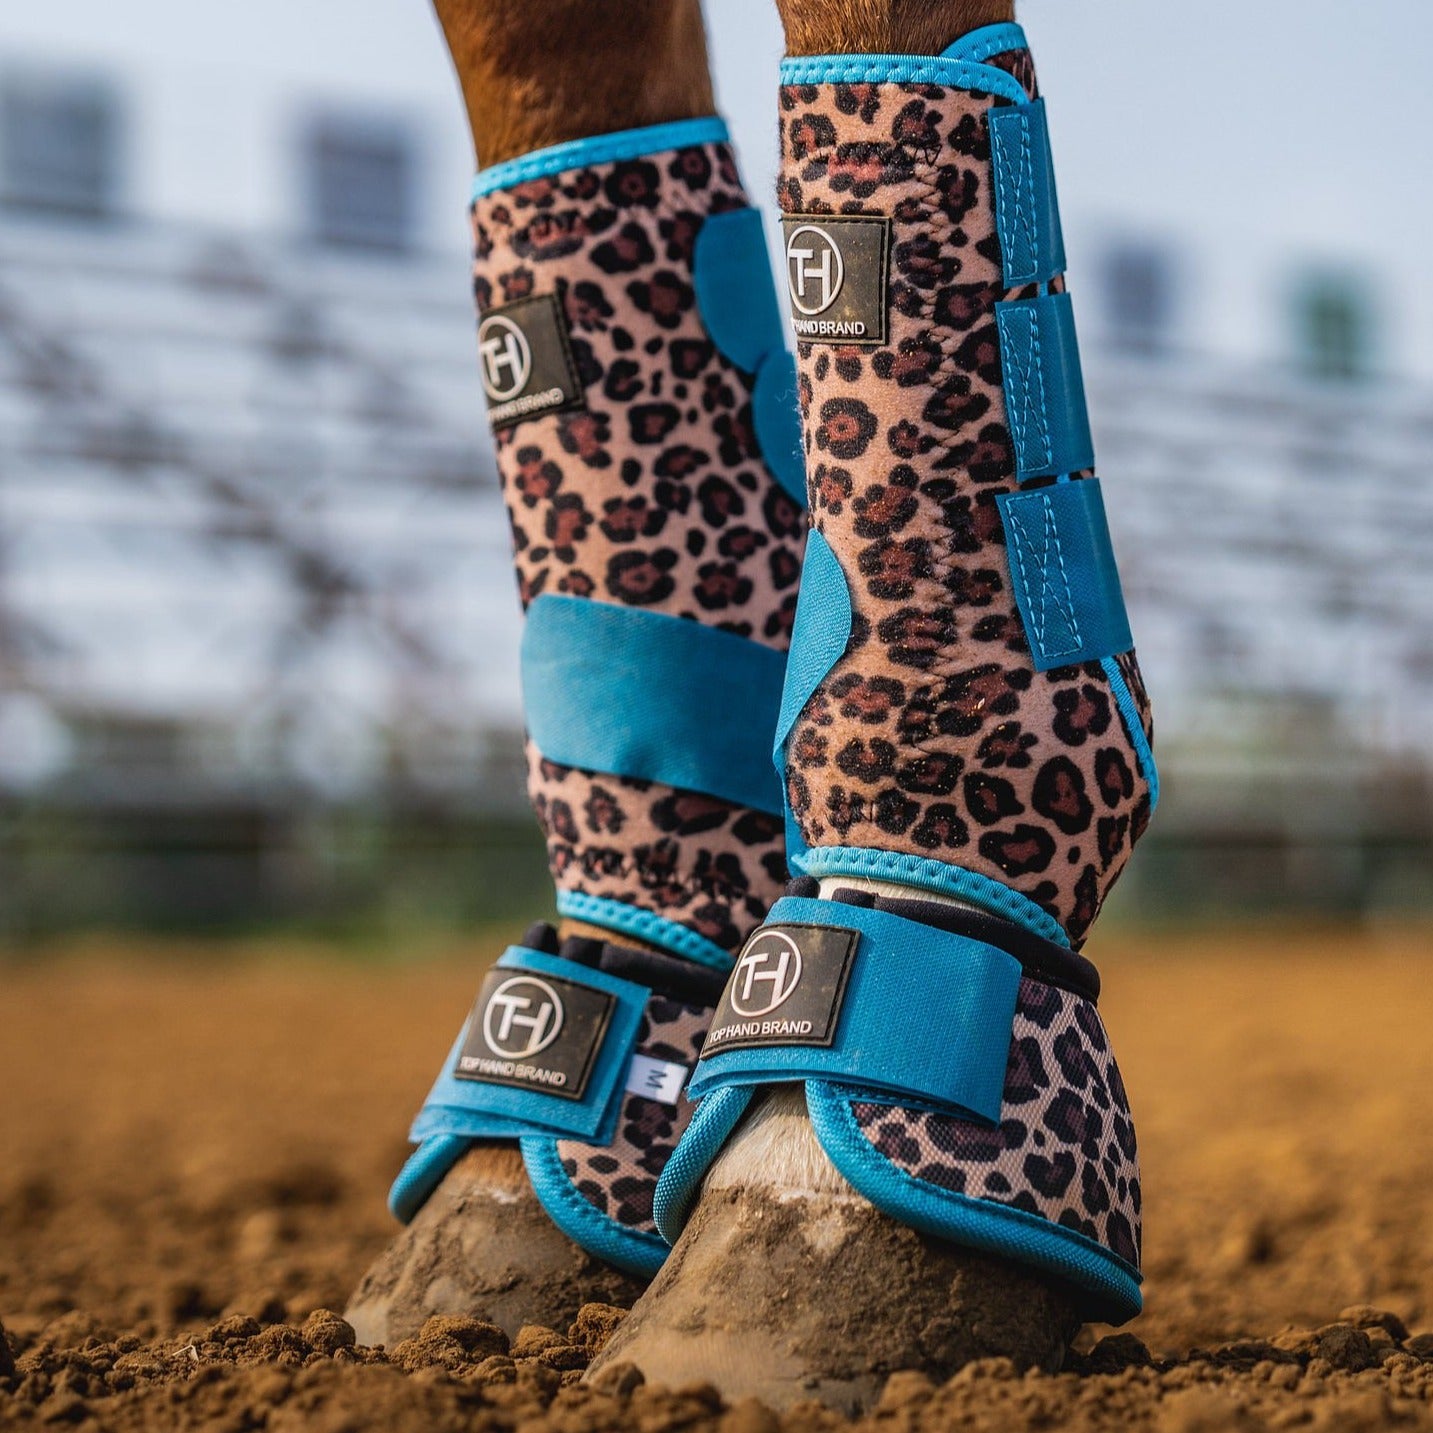 Cheetah and Turquoise Sport Boots – Top Hand Brand